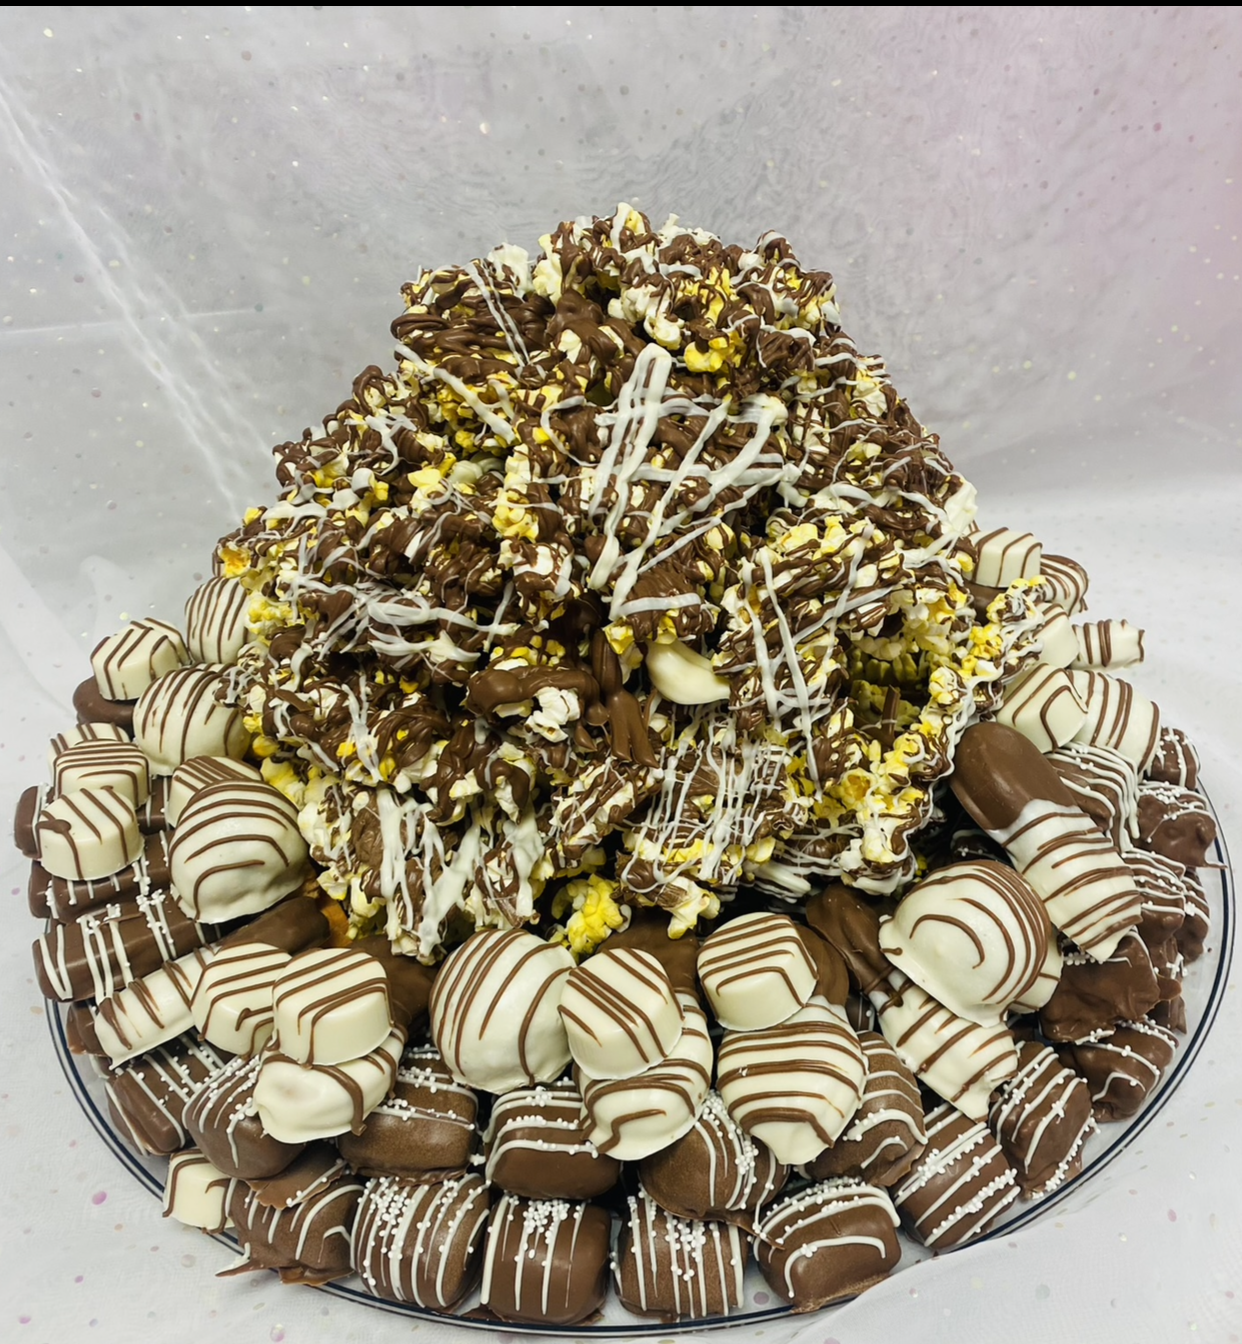 A large platter of chocolate covered cookies and candy.